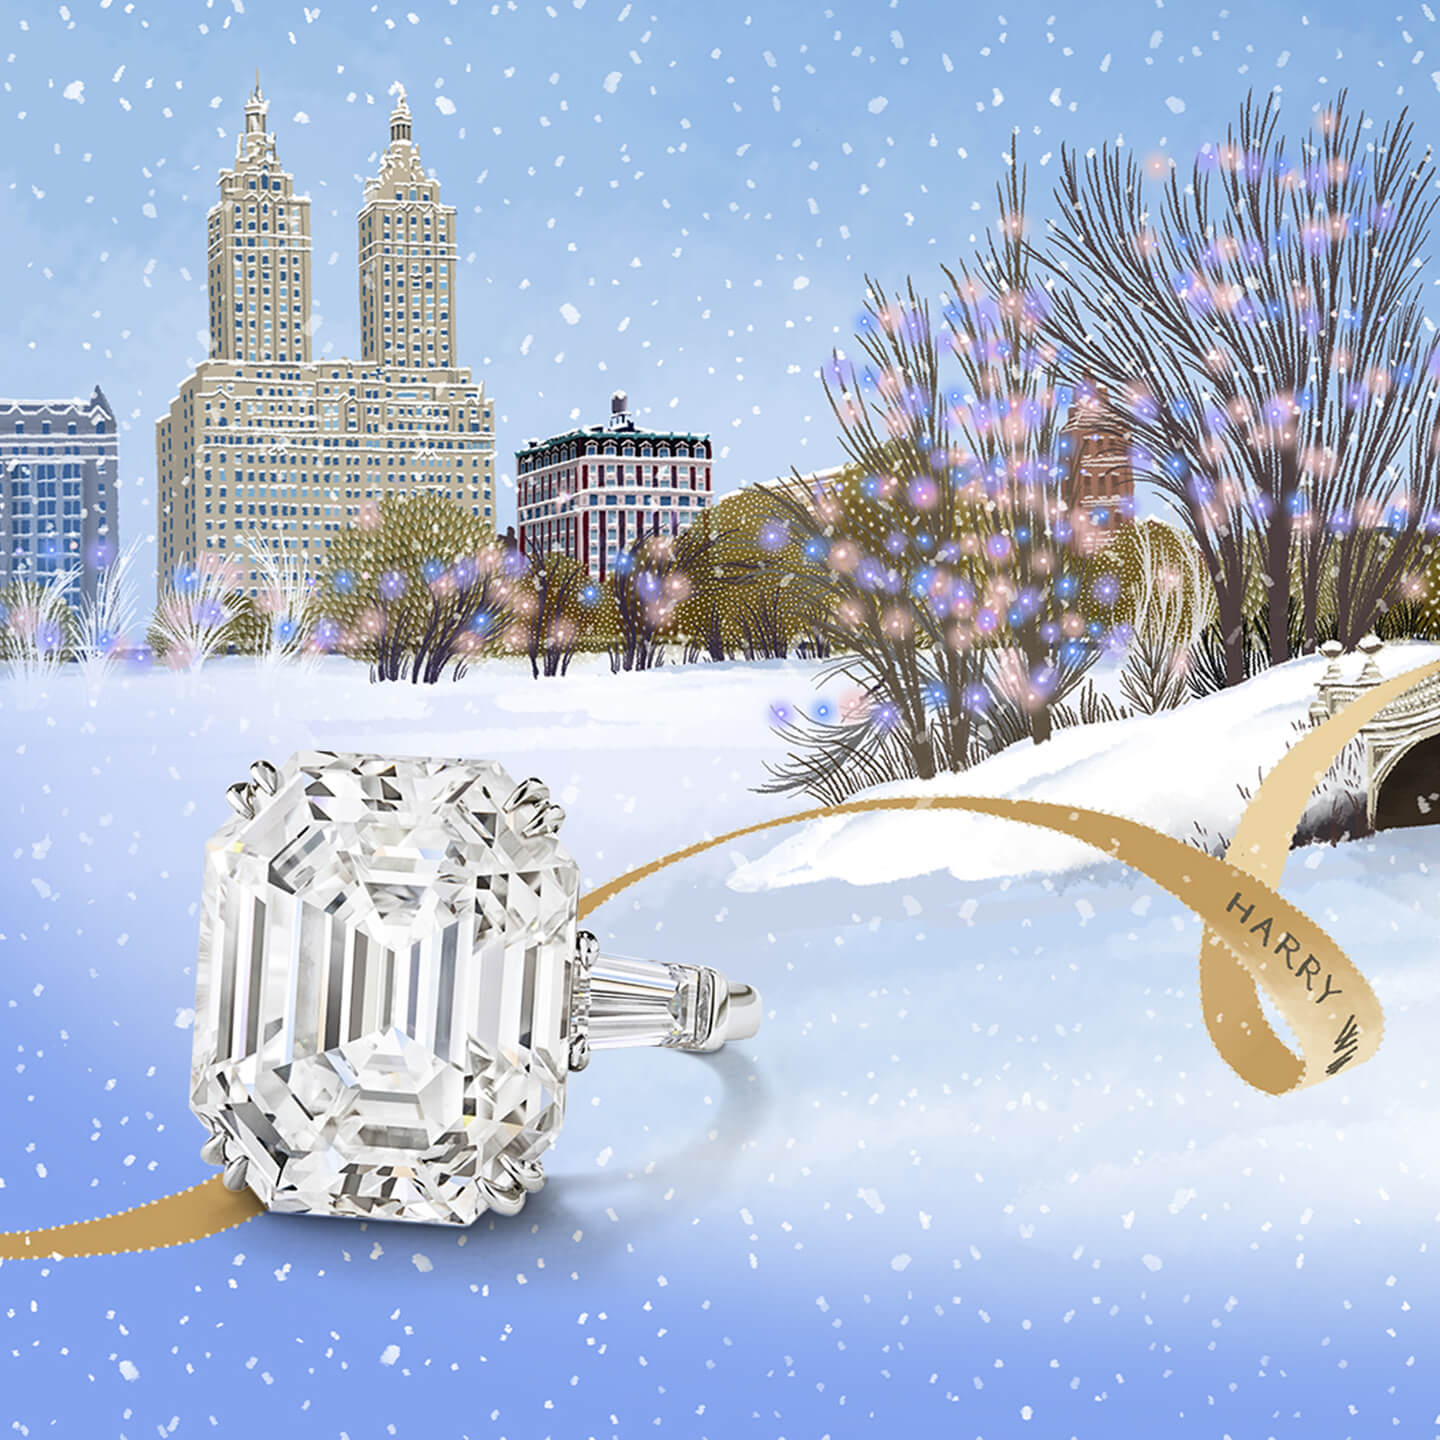 Classic Winston Engagement Ring in Central Park during winter